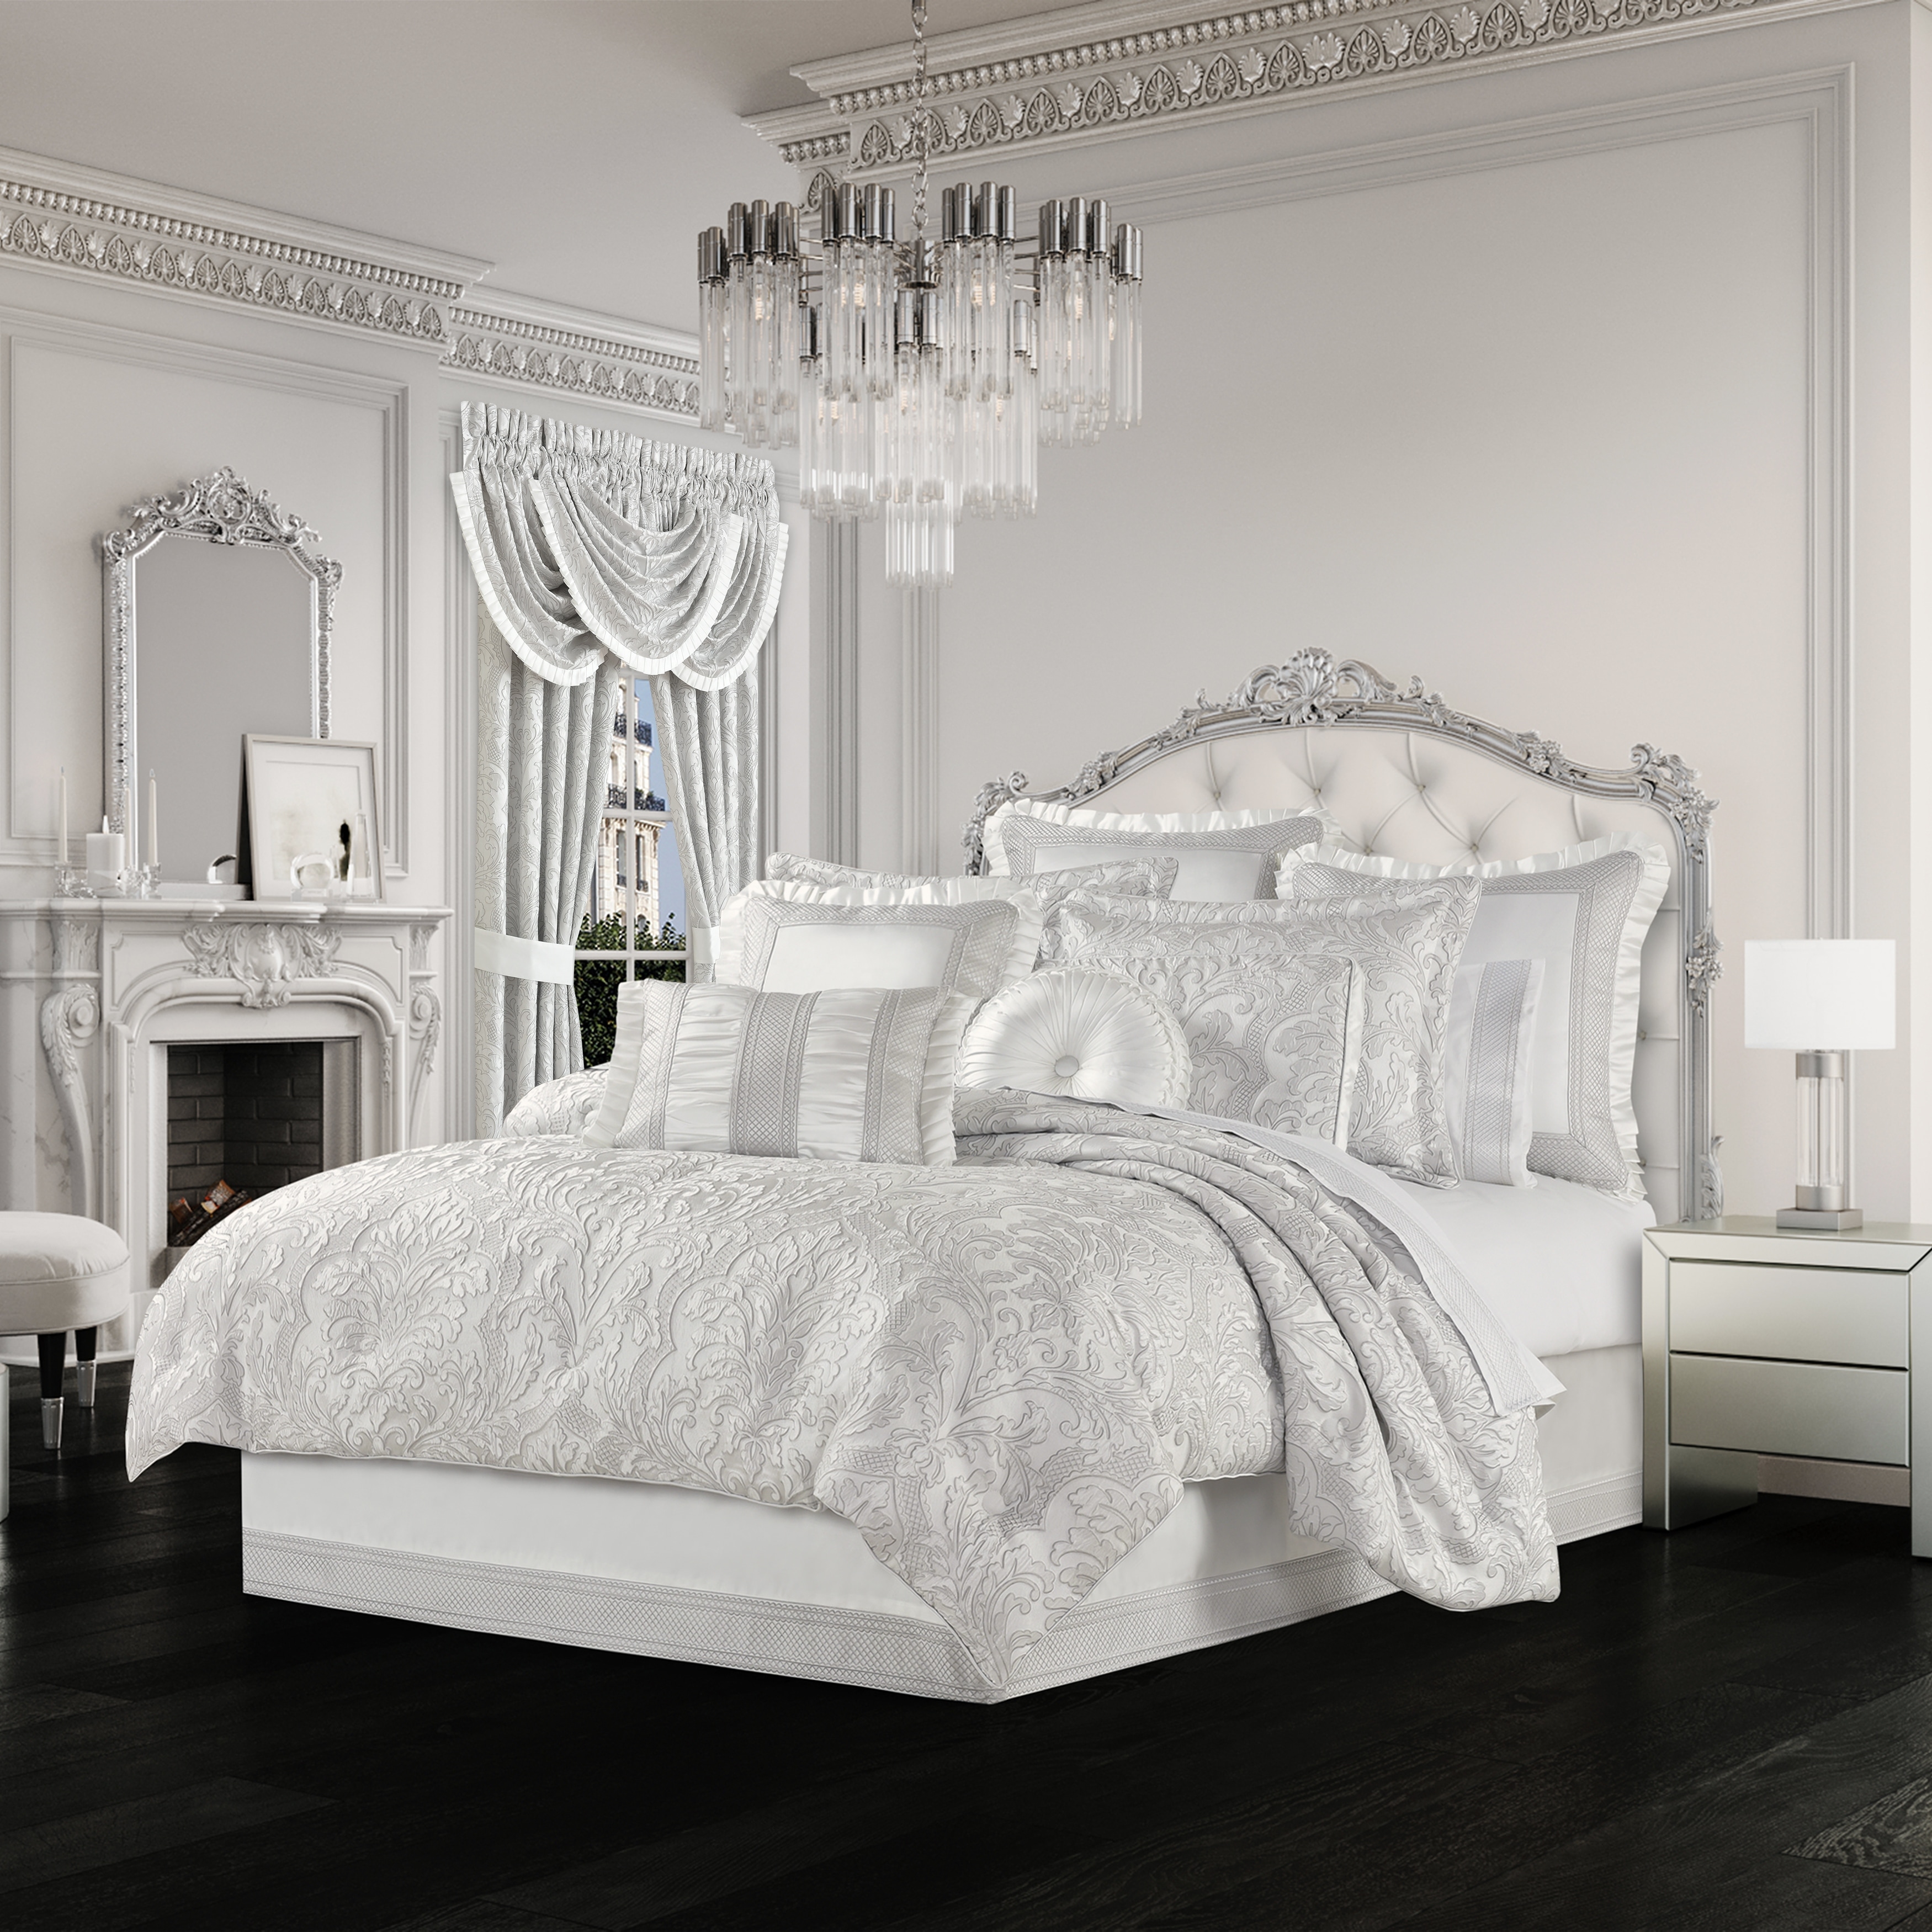 https://ak1.ostkcdn.com/images/products/is/images/direct/f51b776fd8b692eb7307afe60c75359521e85734/Five-Queens-Court-Branson-Comforter-Set.jpg